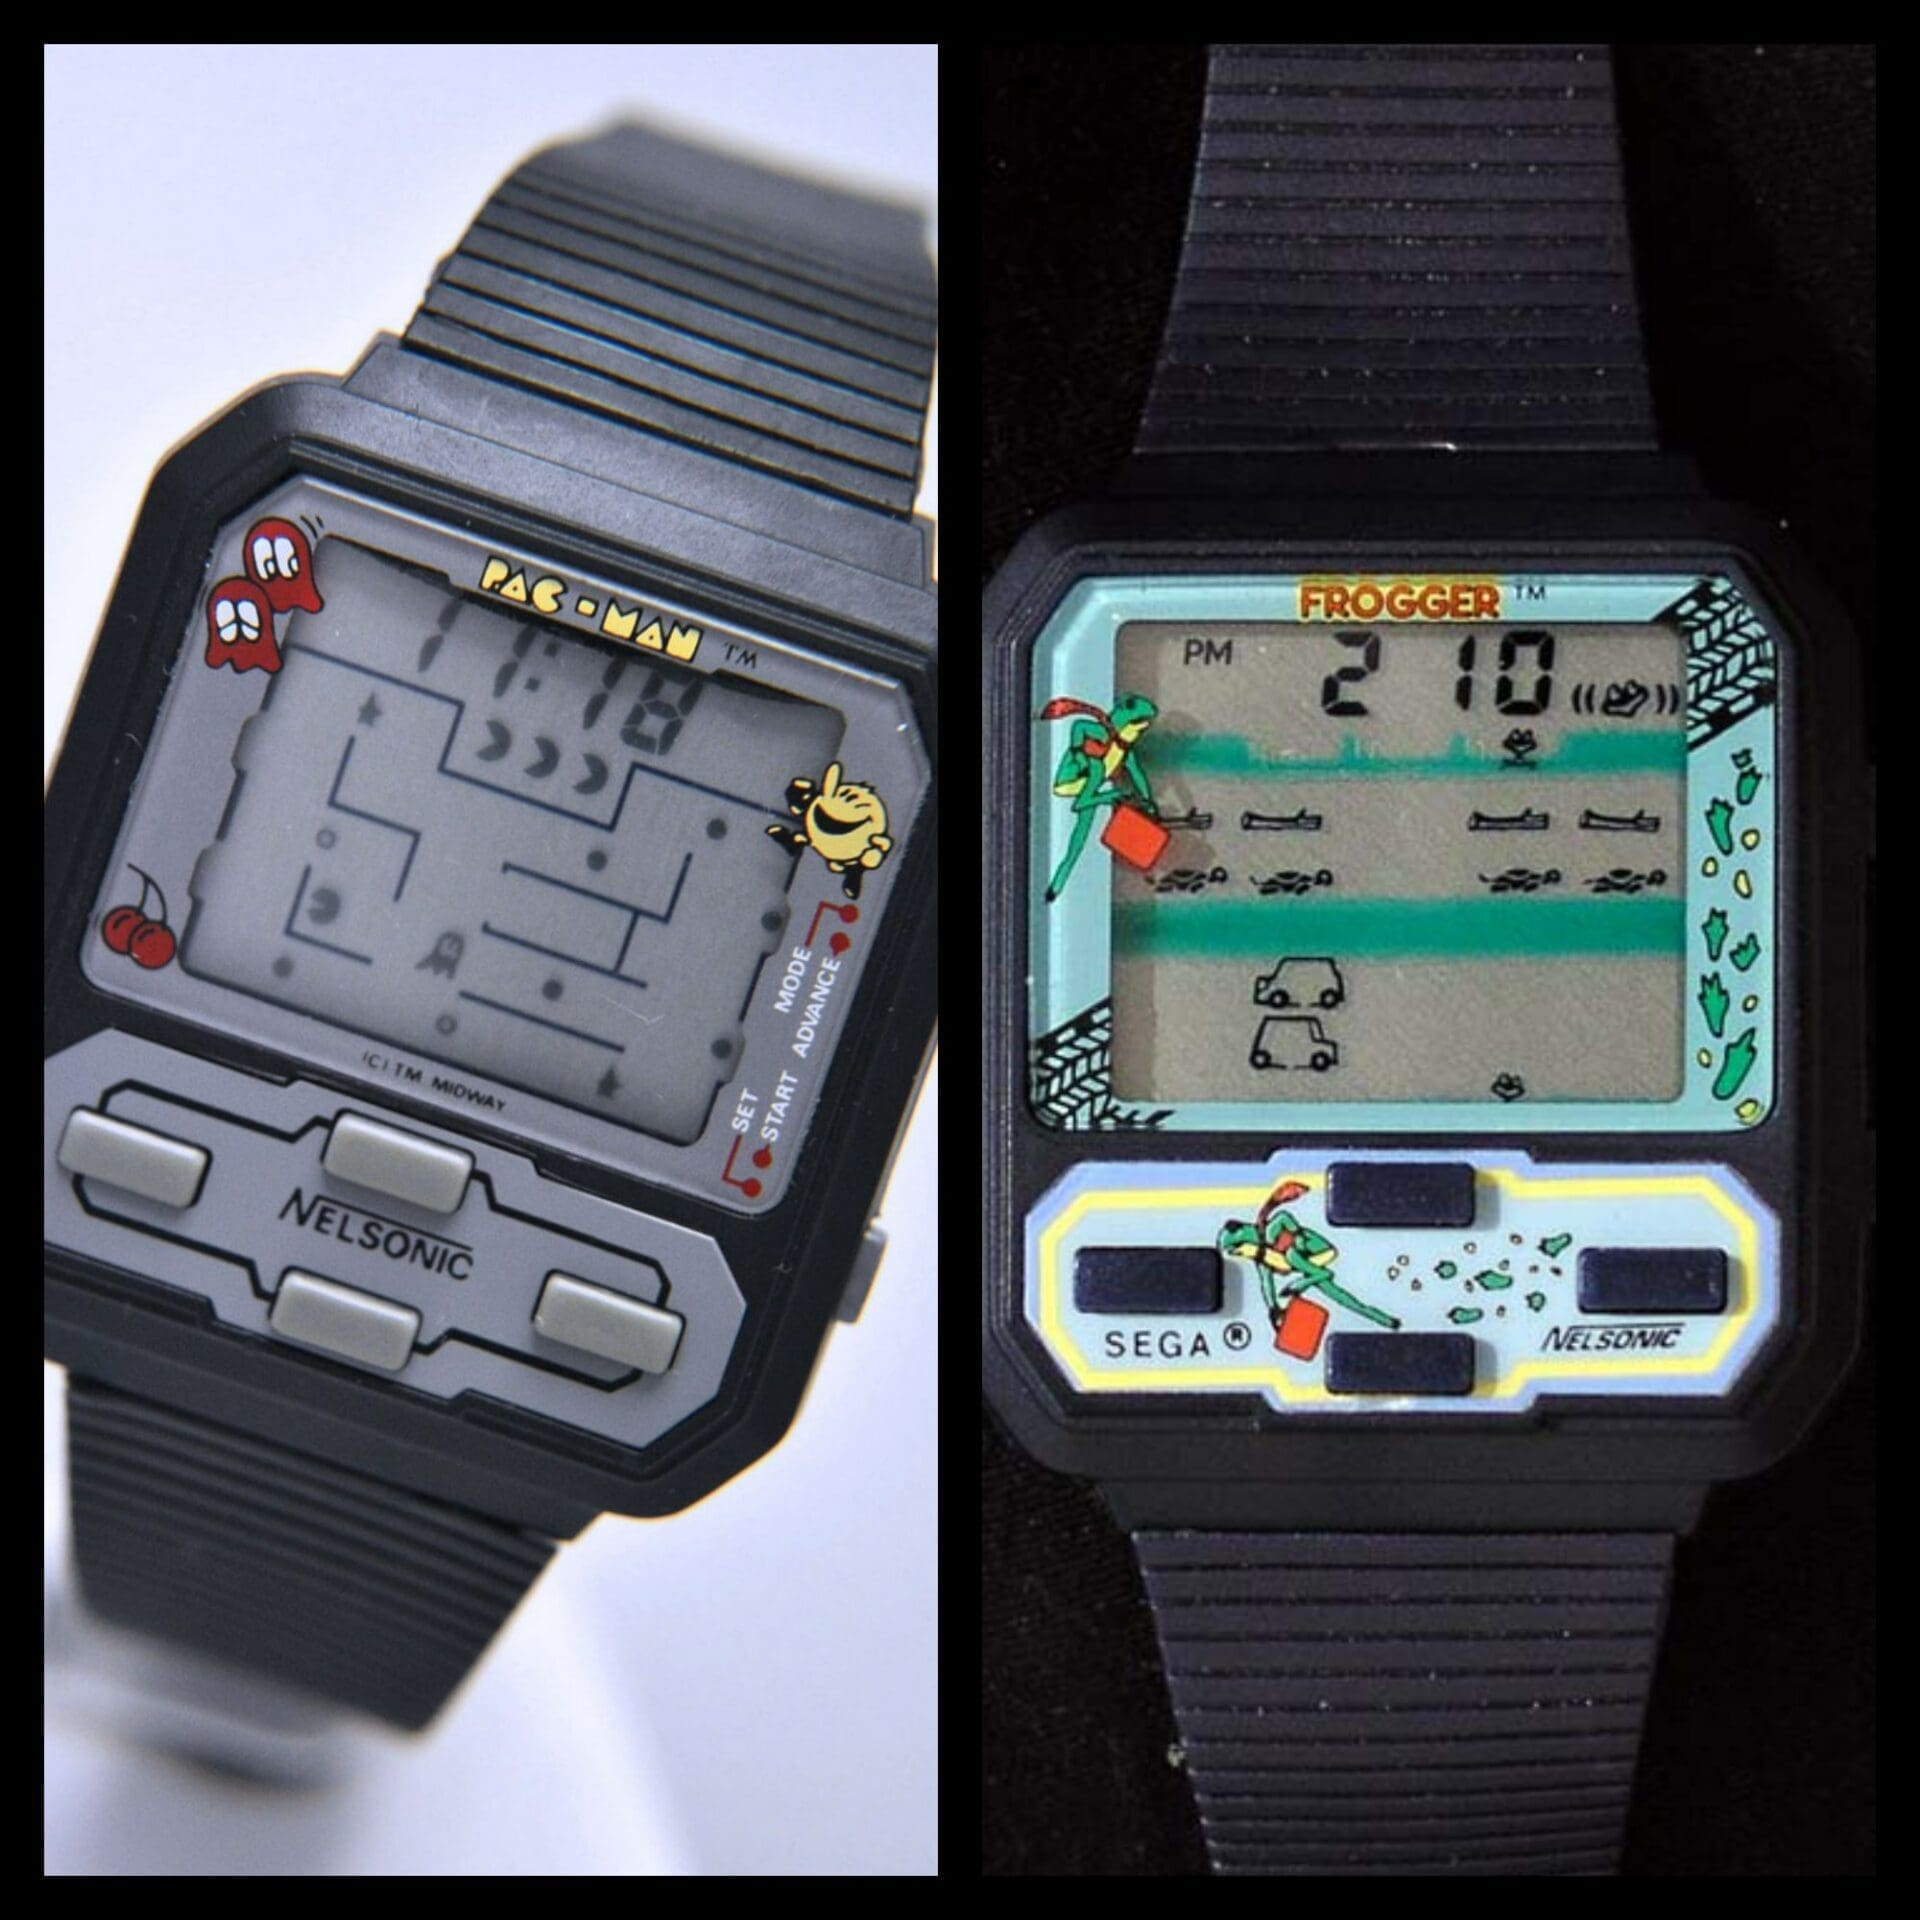 Vintage video game watches offer real wrist game